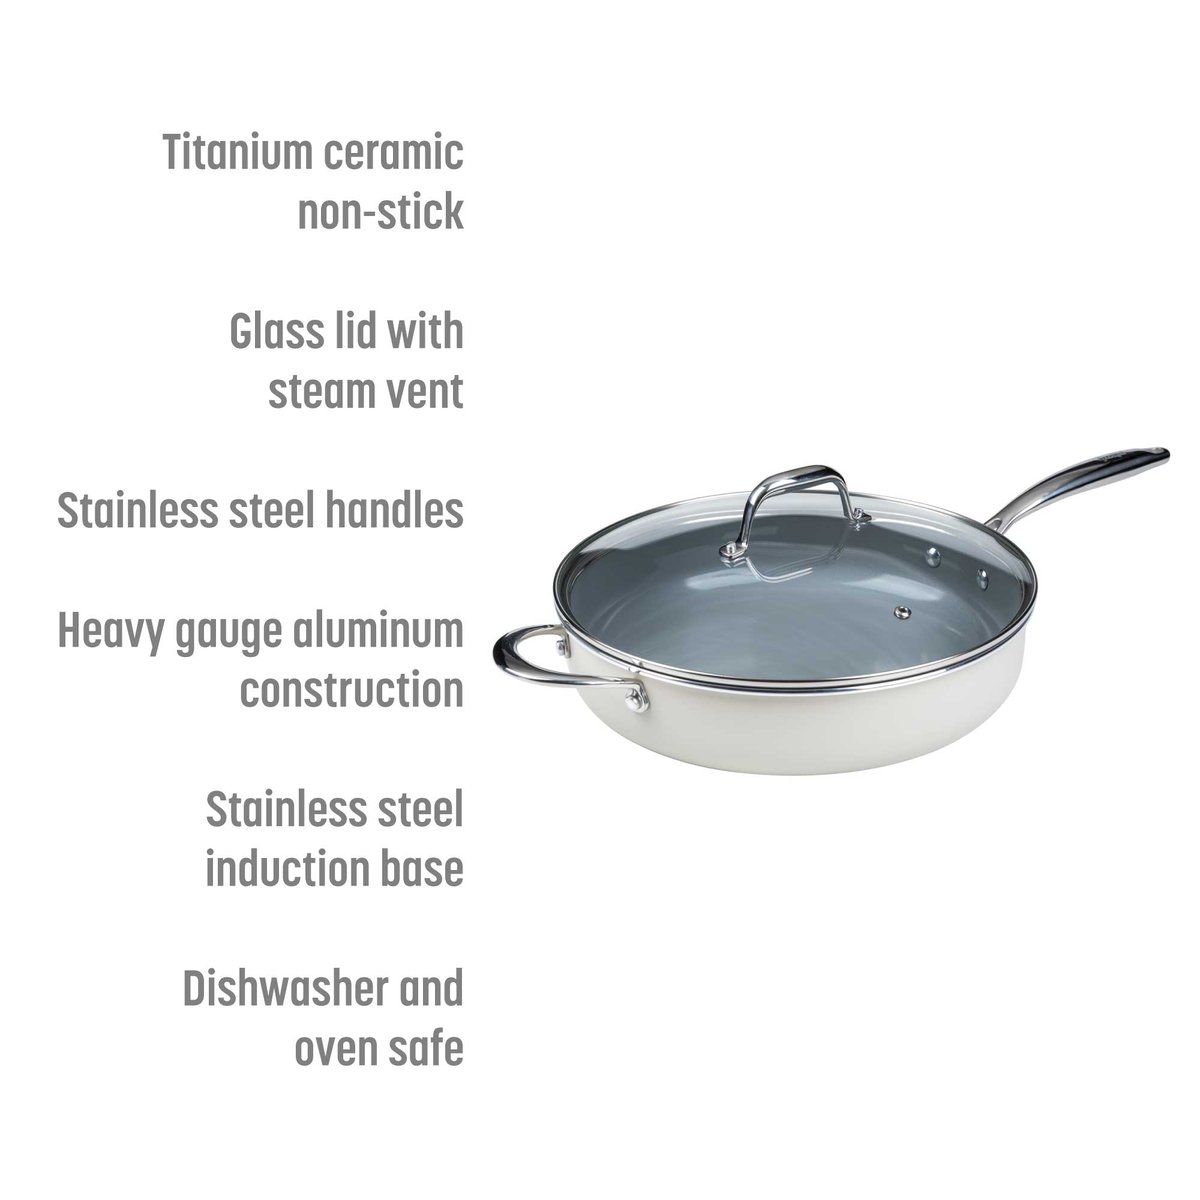 https://images.verishop.com/goodful-kitchen-goodful-ceramic-nonstick-4-quart-deep-pan-with-lid-dishwasher-safe-comfort-grip-stainless-steel-handle-cream/M00741393480061-4026197609?auto=format&cs=strip&fit=max&w=1200